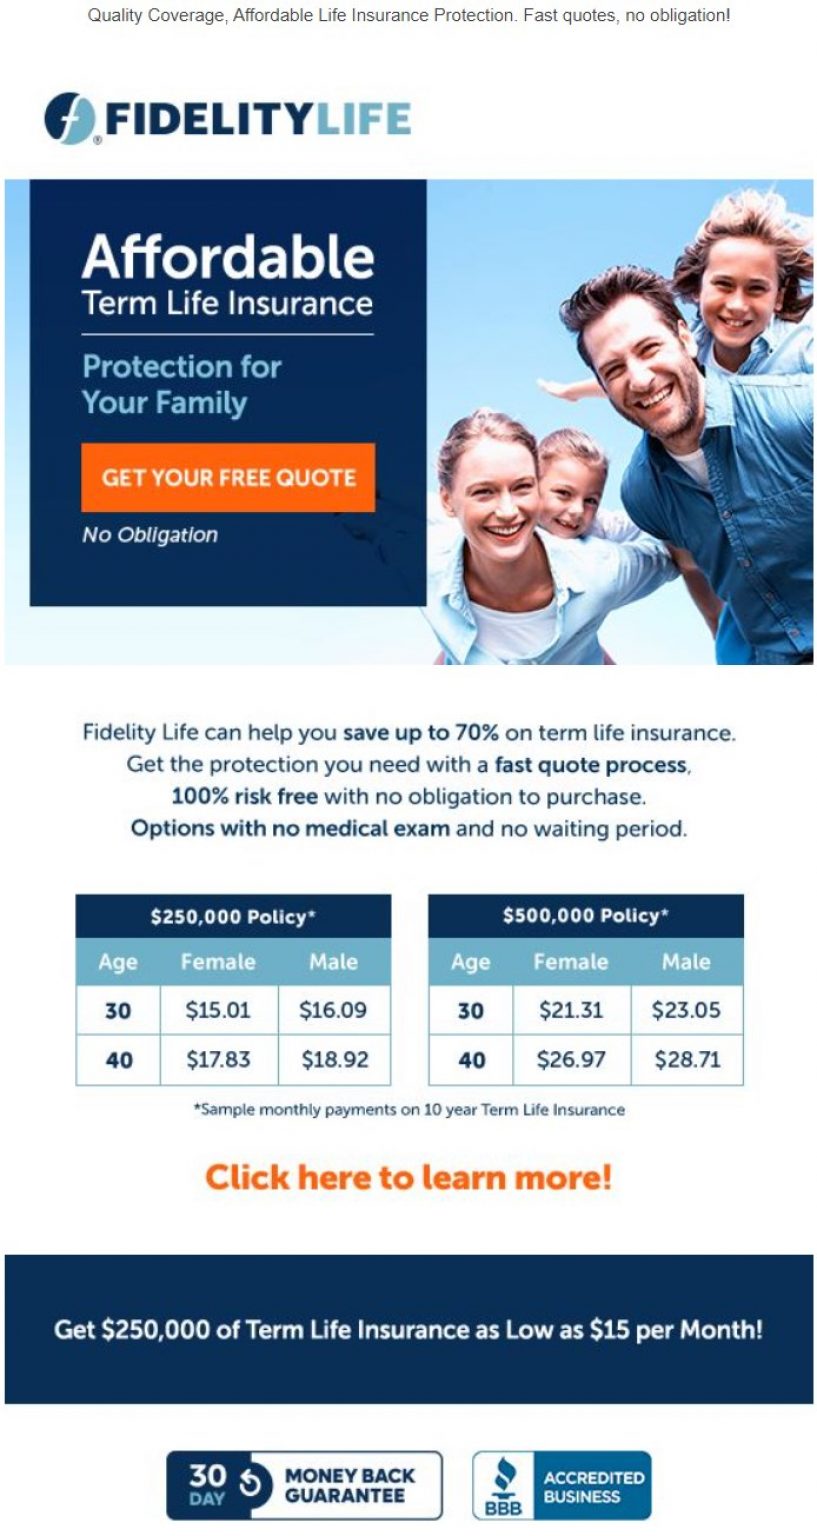 Protect What Matters in 2021, Get Life Insurance Now Wise to Use